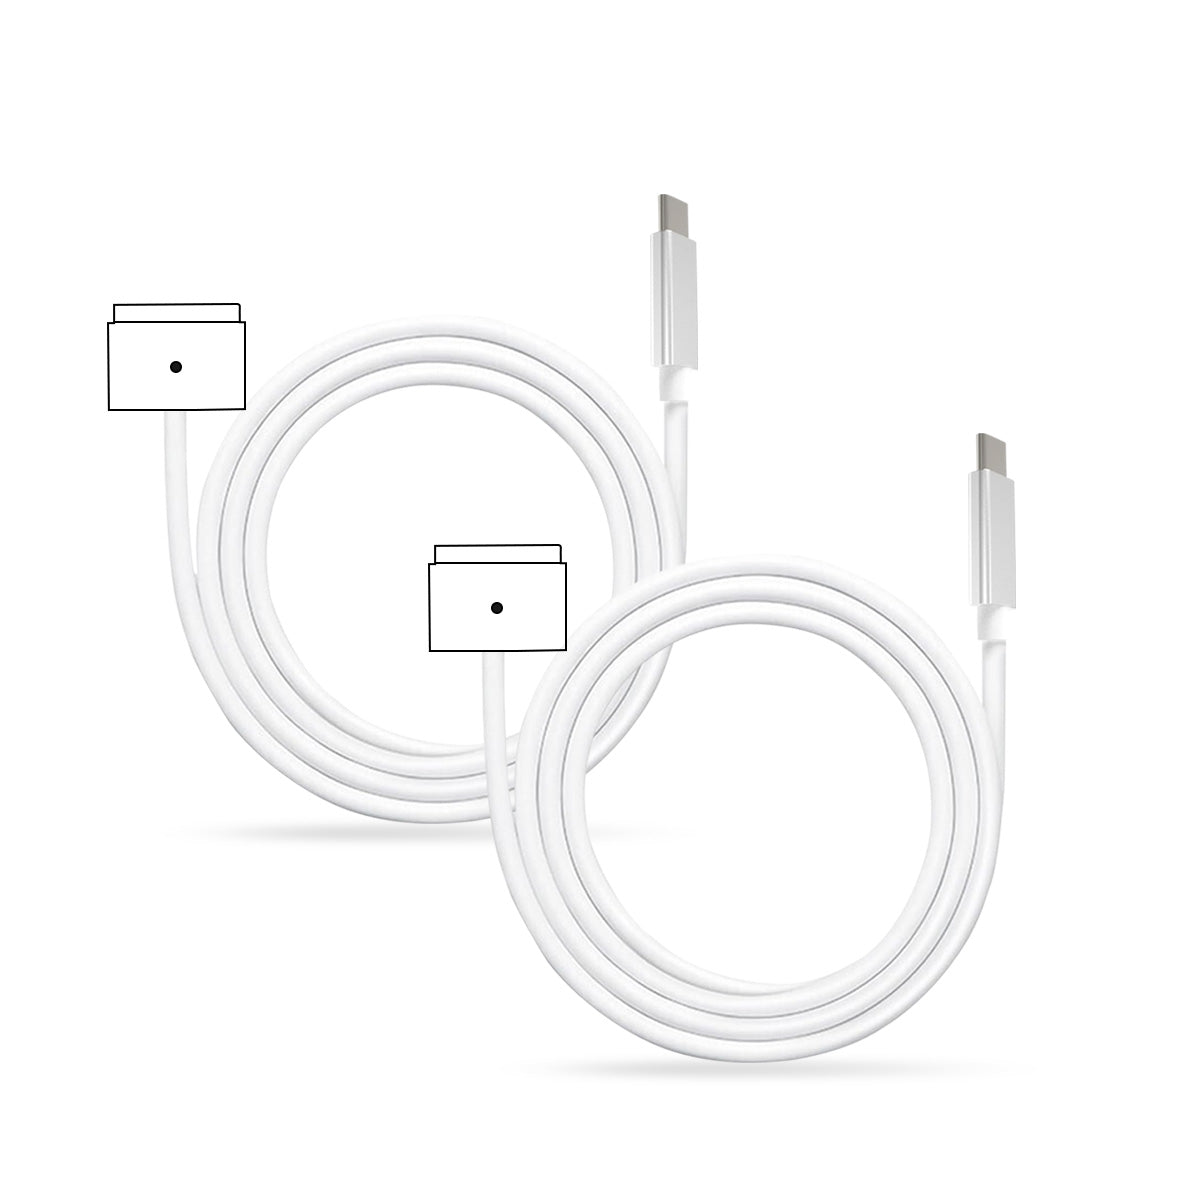 SEVEN PUPPY Brand NEW For Macbook Air / Pro After Mid 2012 Year Type c To Magsafe 2 T Repair Charger DC Power Adapter Cable